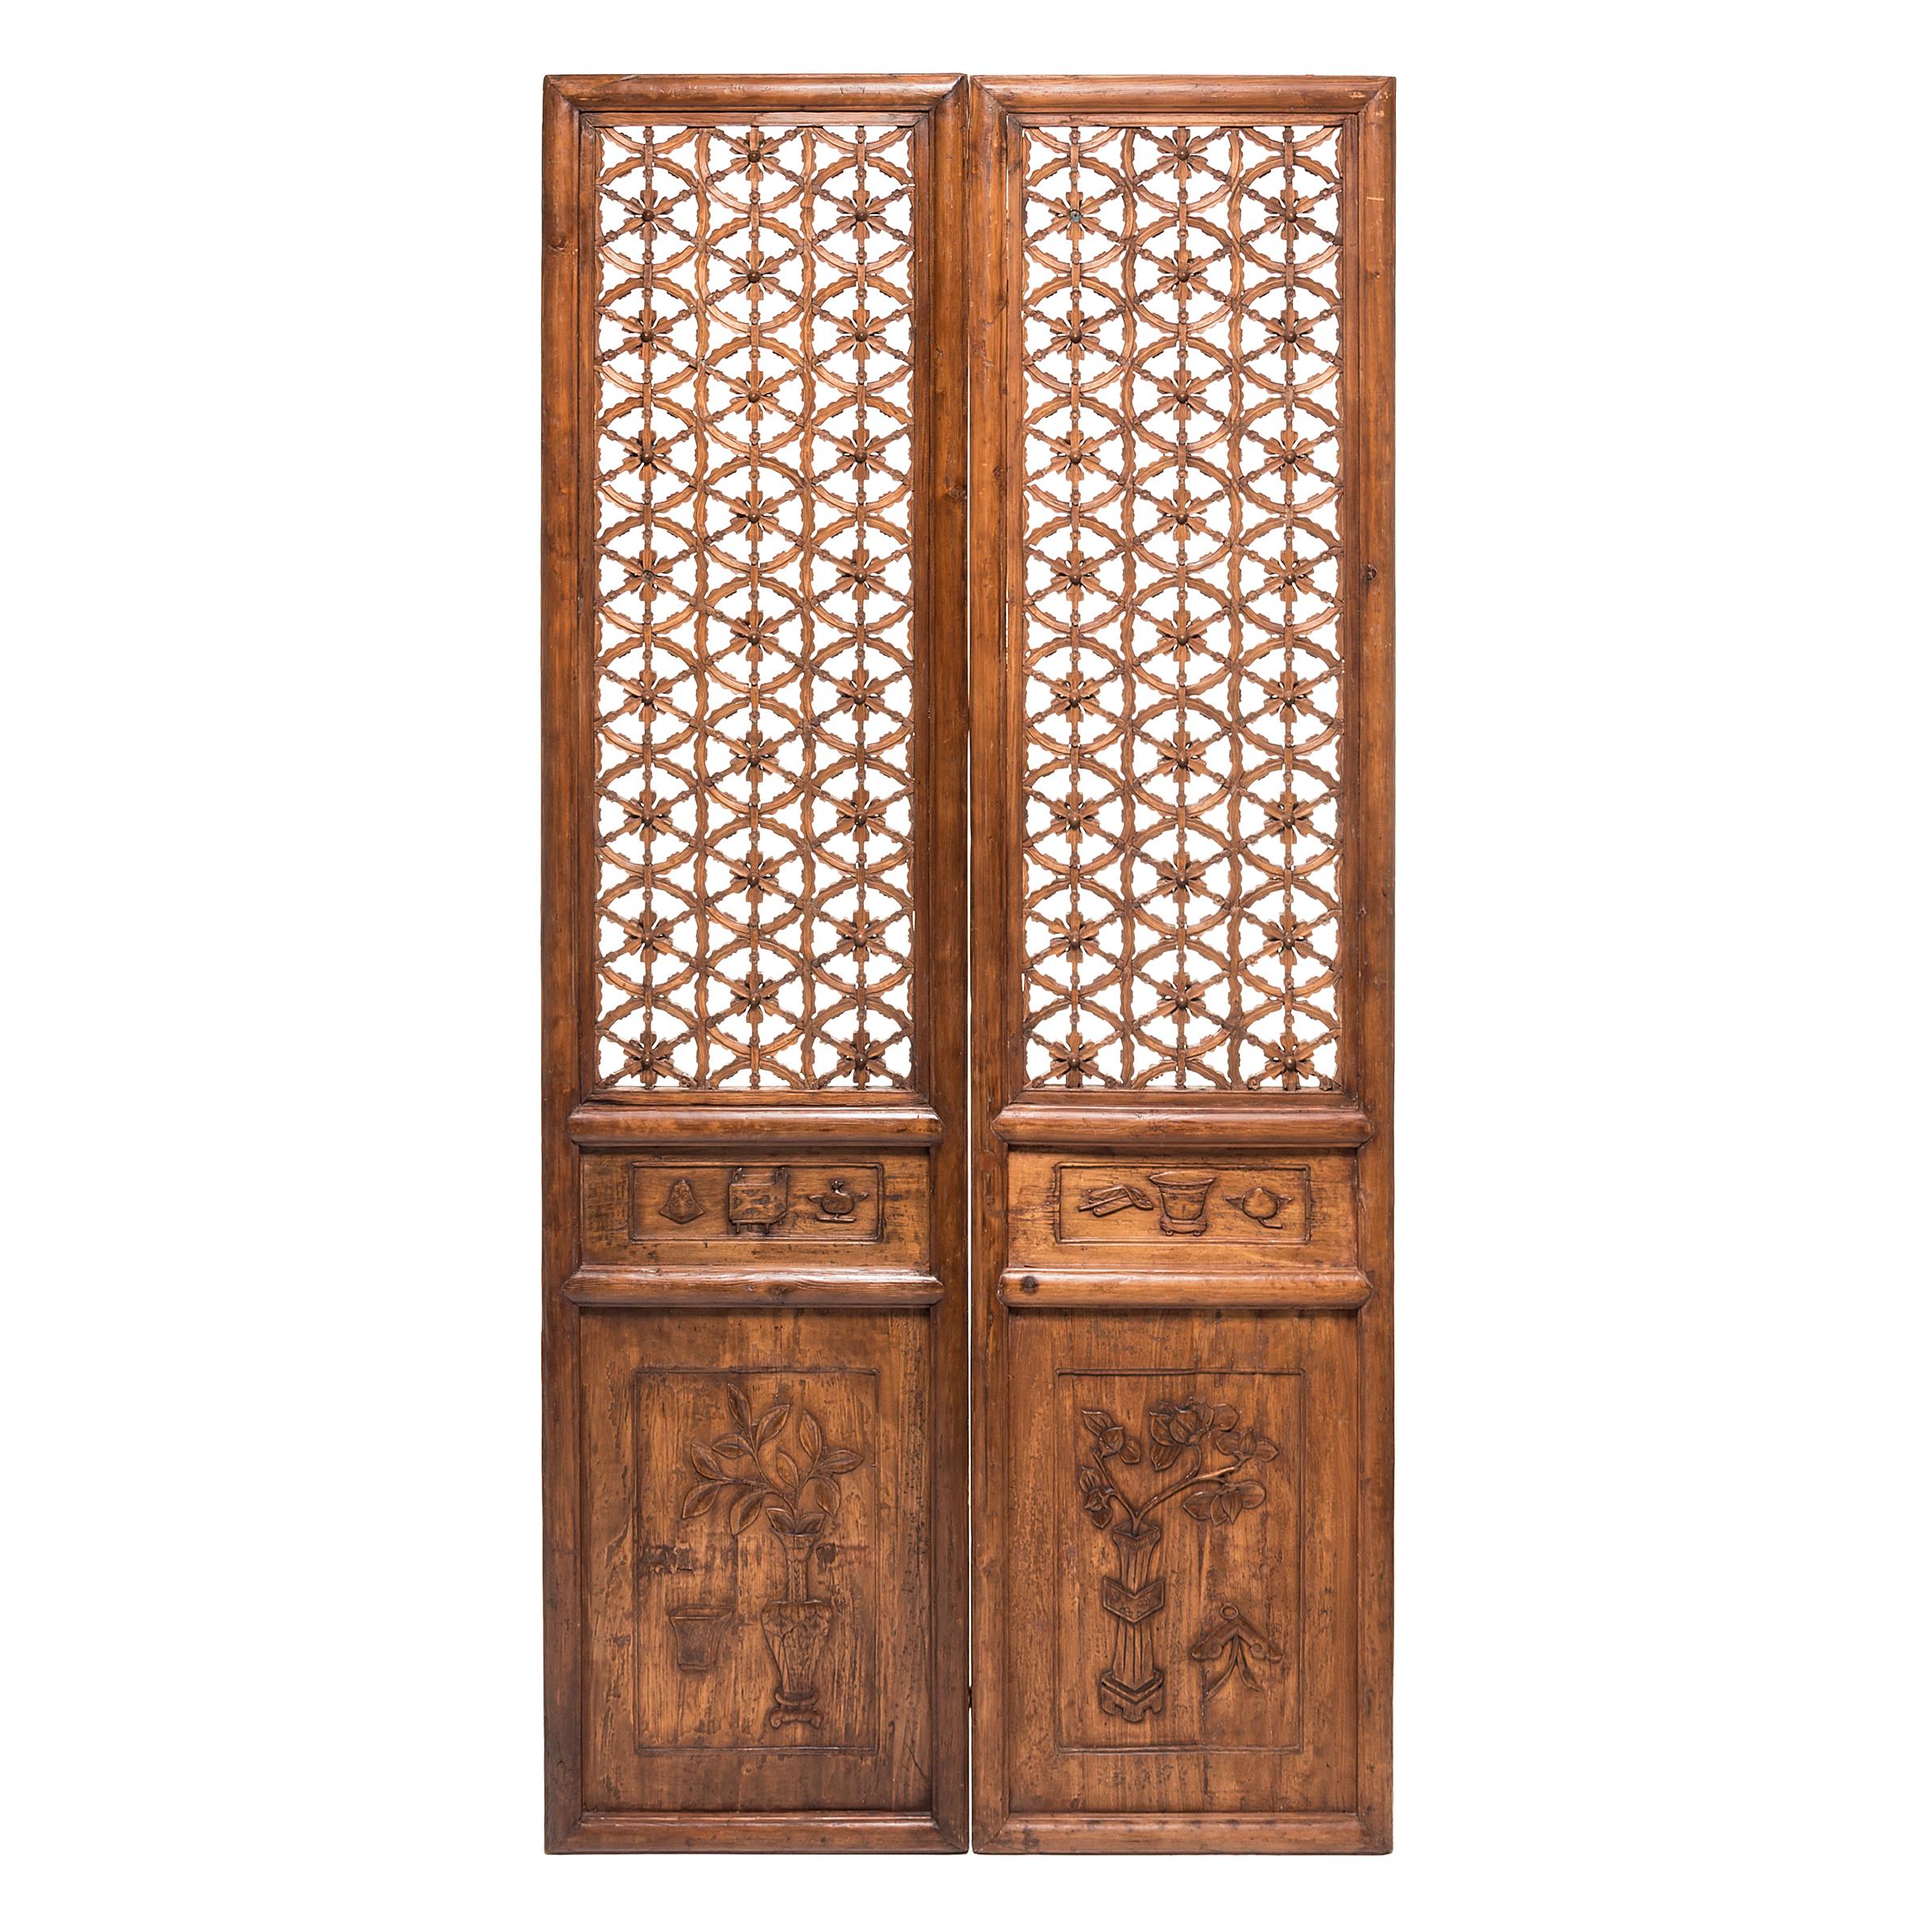 The sweeping elegance of these four 18th century courtyard doors, with their intricate lattice panels, hides the mathematical brilliance required to create them. The panels recall life in a traditional courtyard home, where the openwork lattice